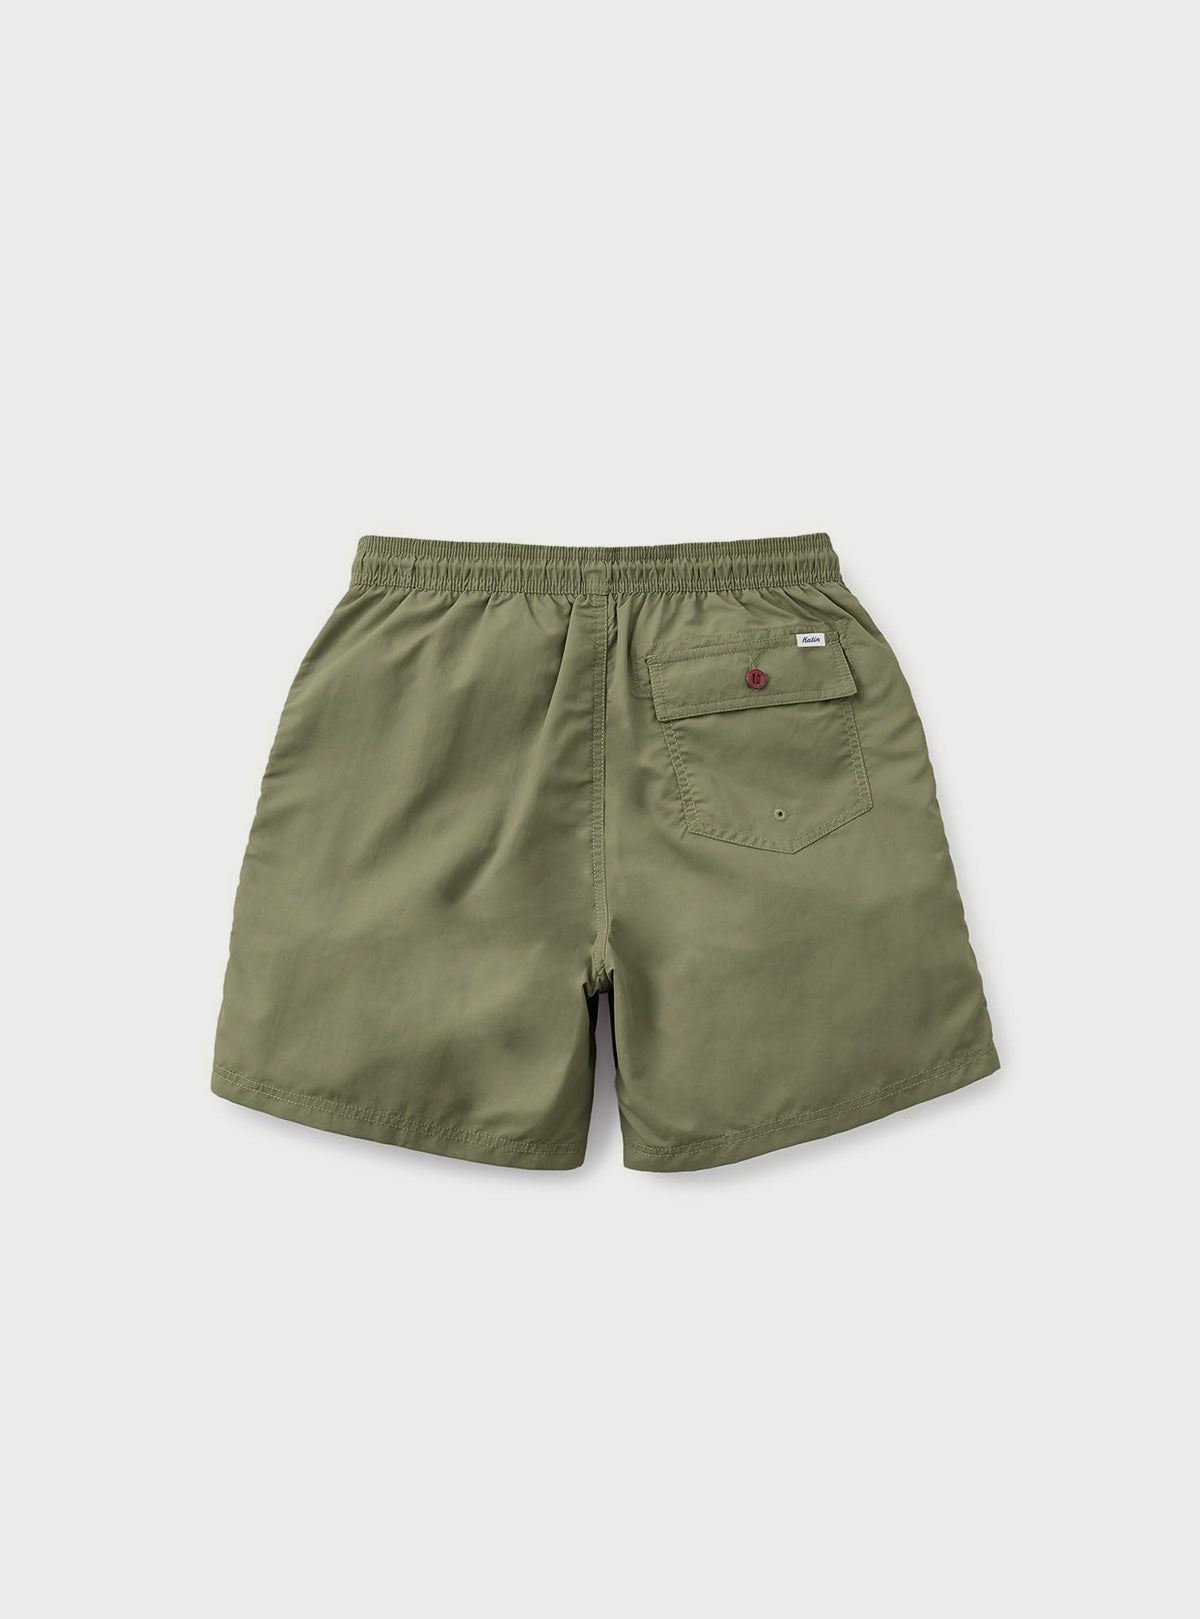 Katin - Poolside Volley - Olive